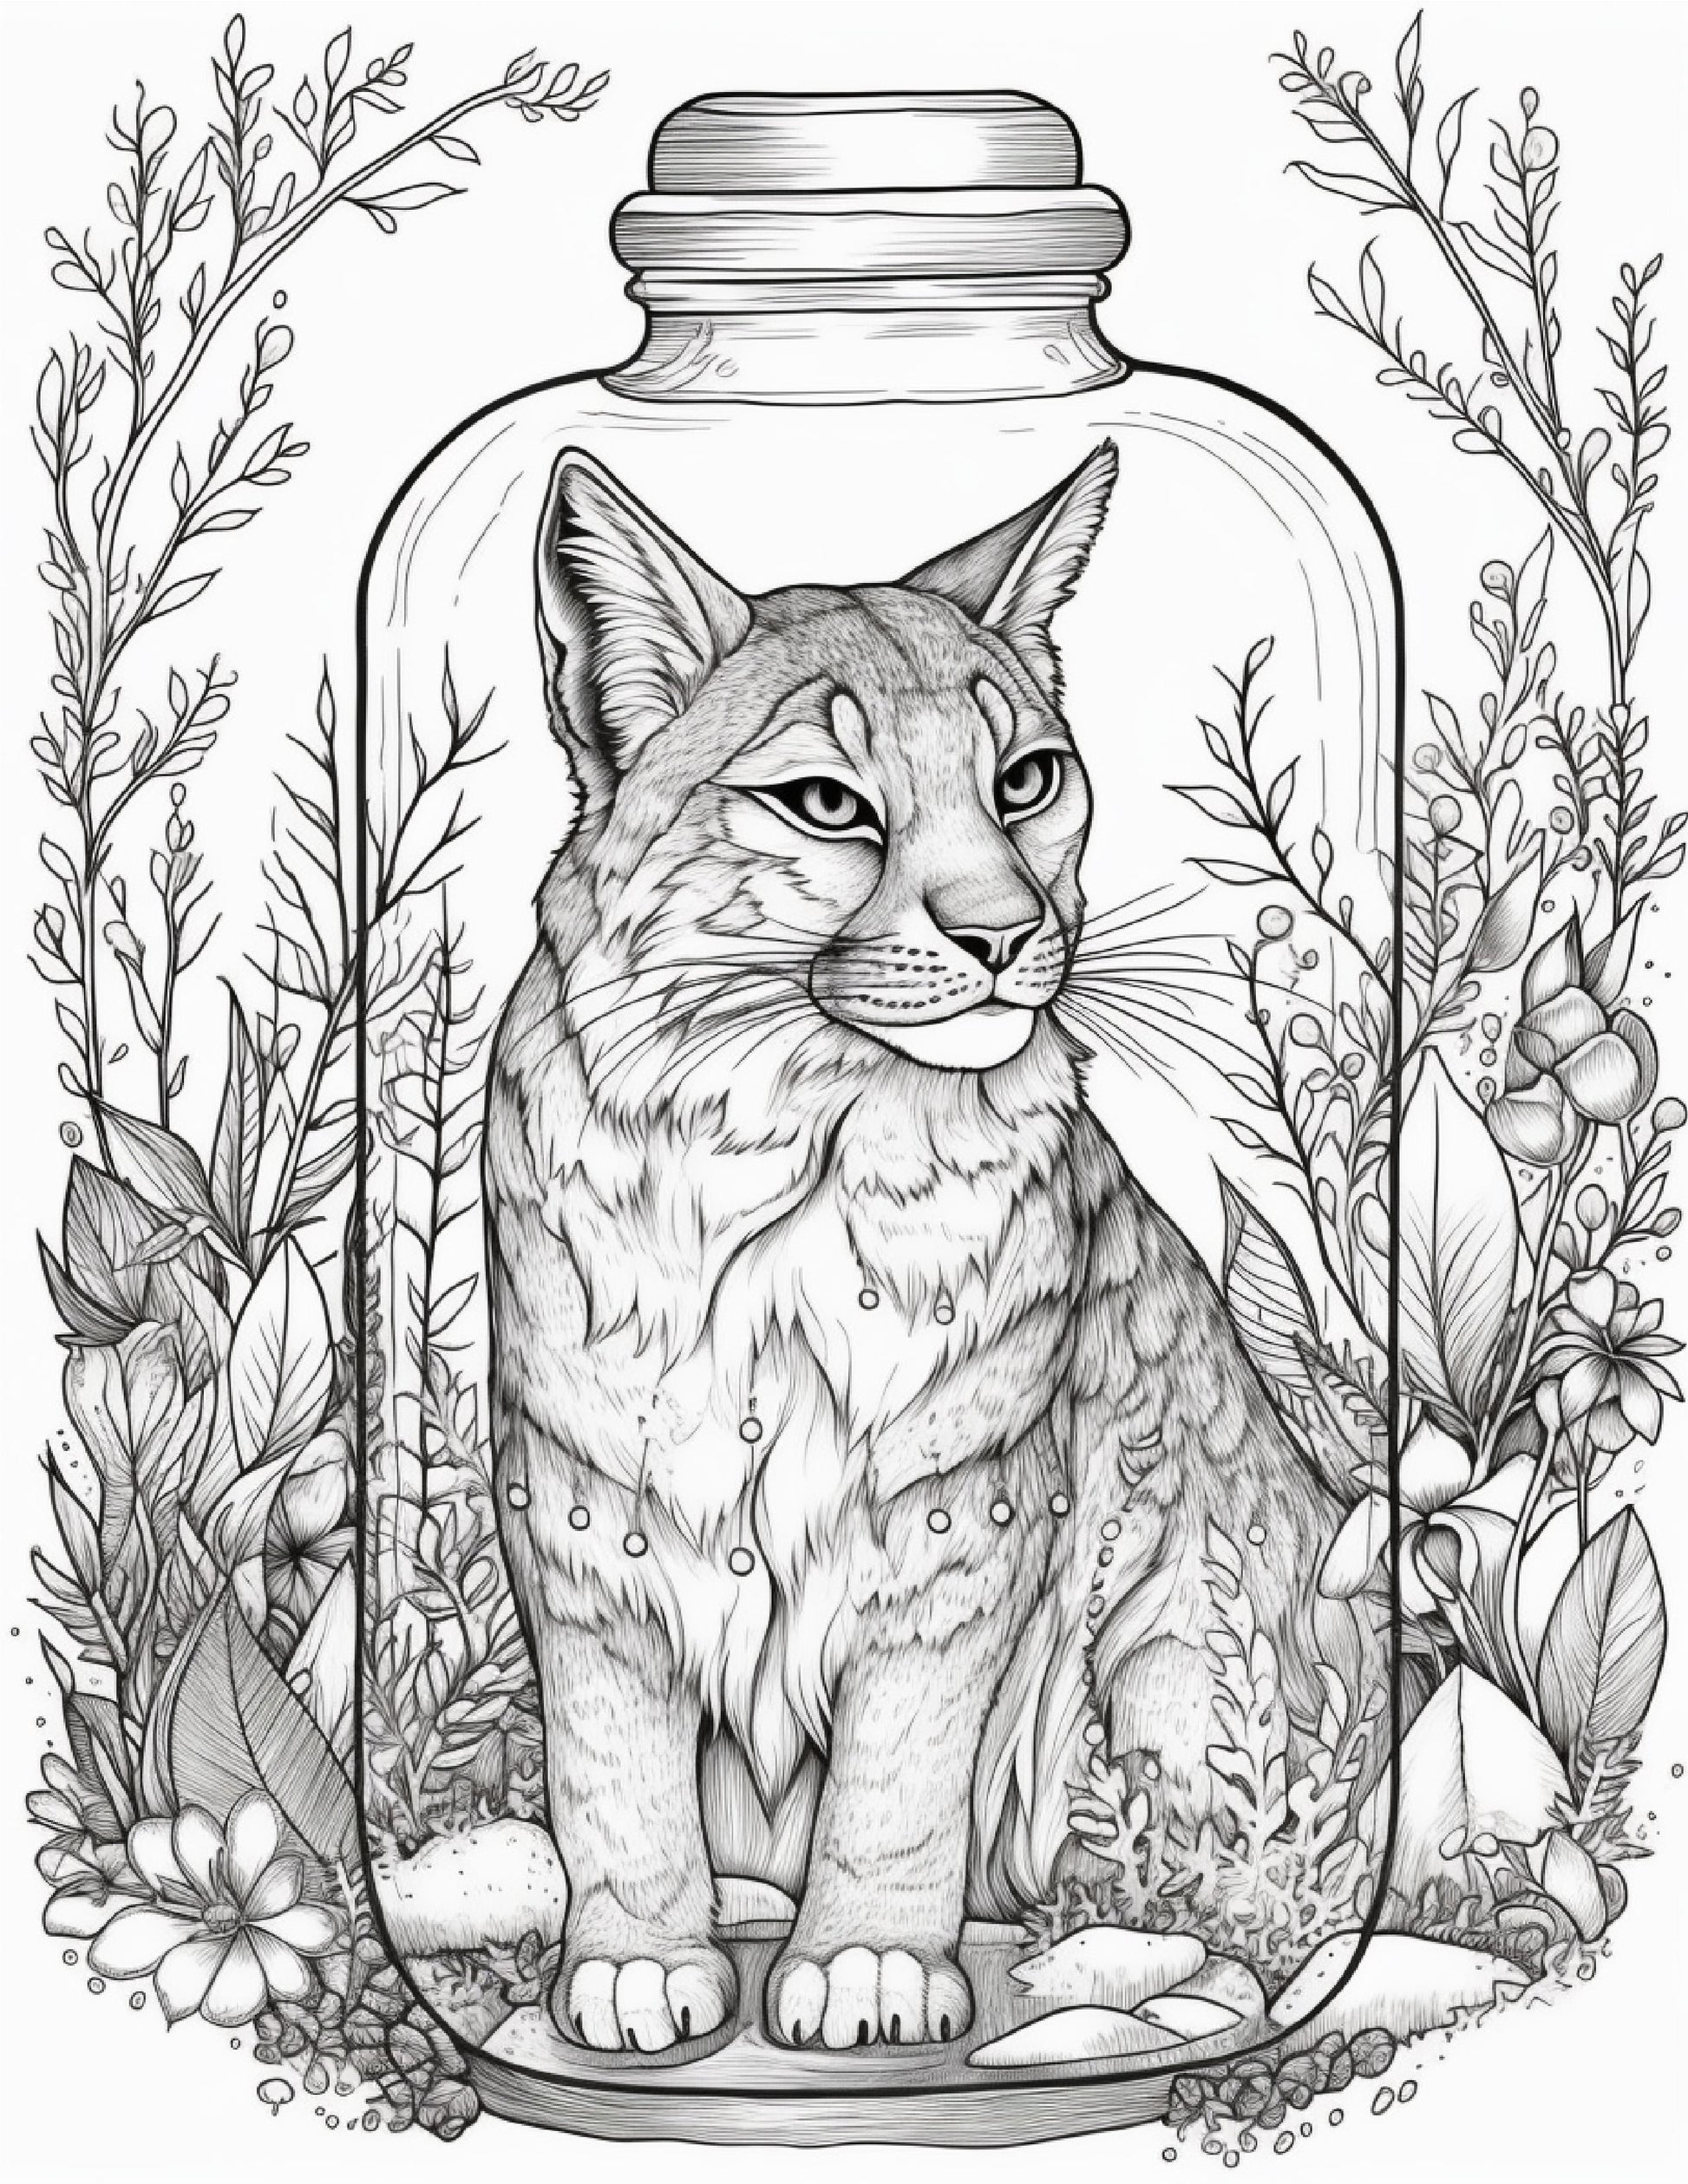 Life inside jar printable coloring pages for adults grayscale colo â coloring